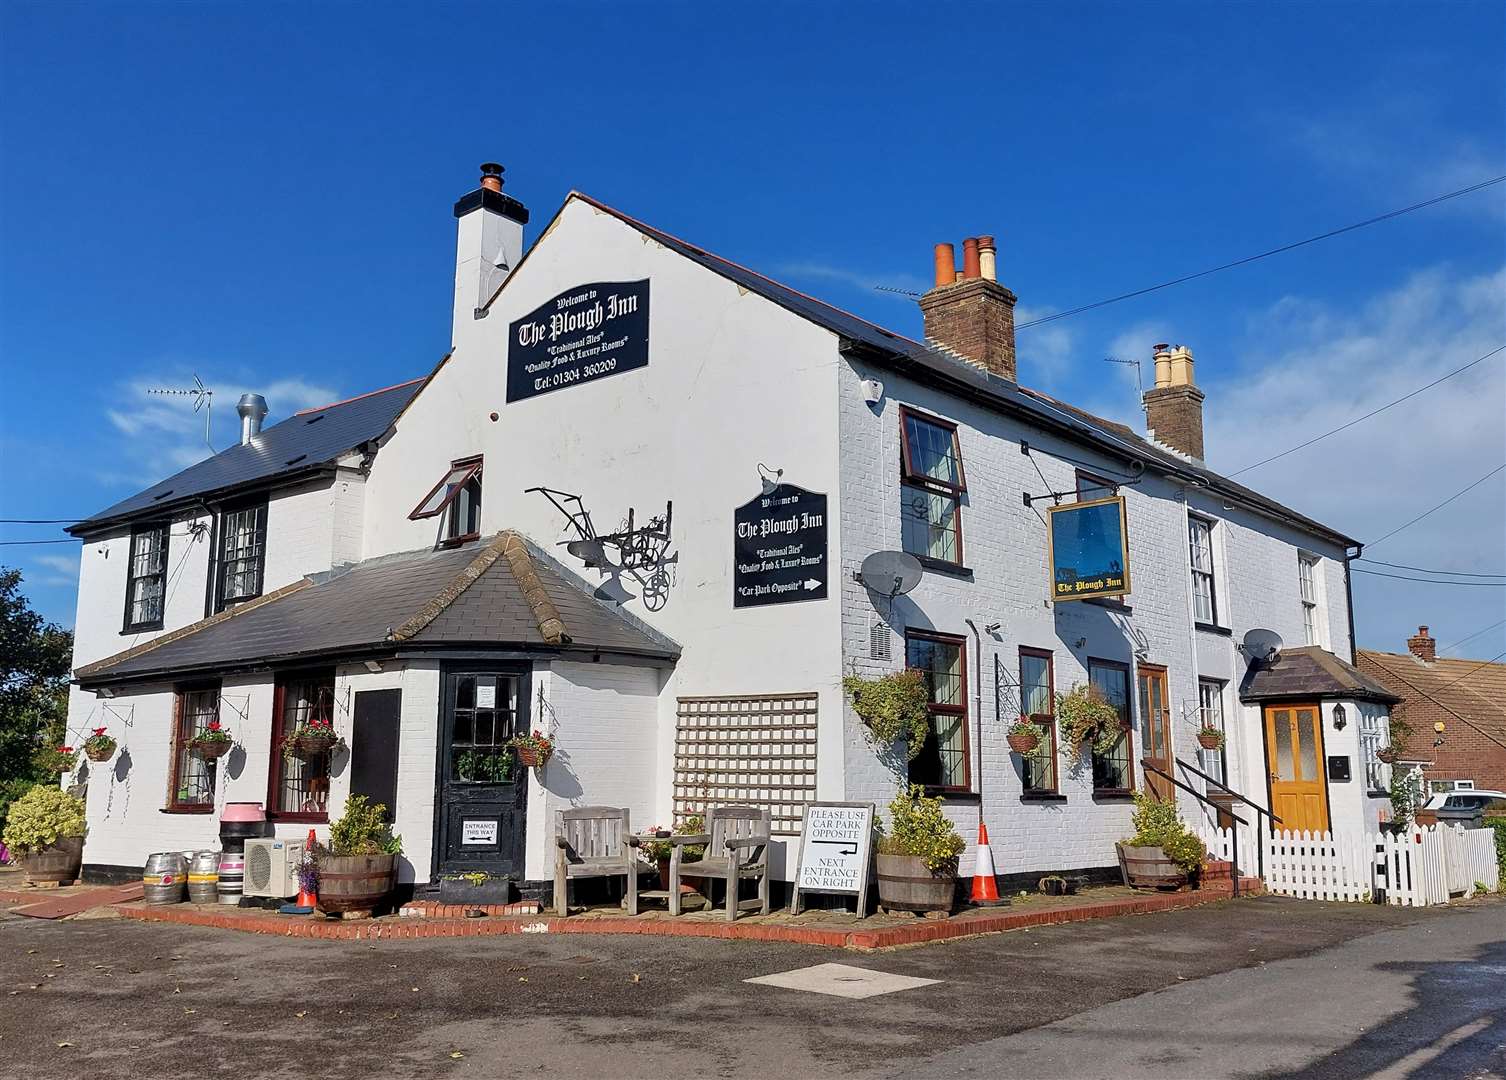 The Plough Inn in Ripple, near Deal, is now as asset of community value